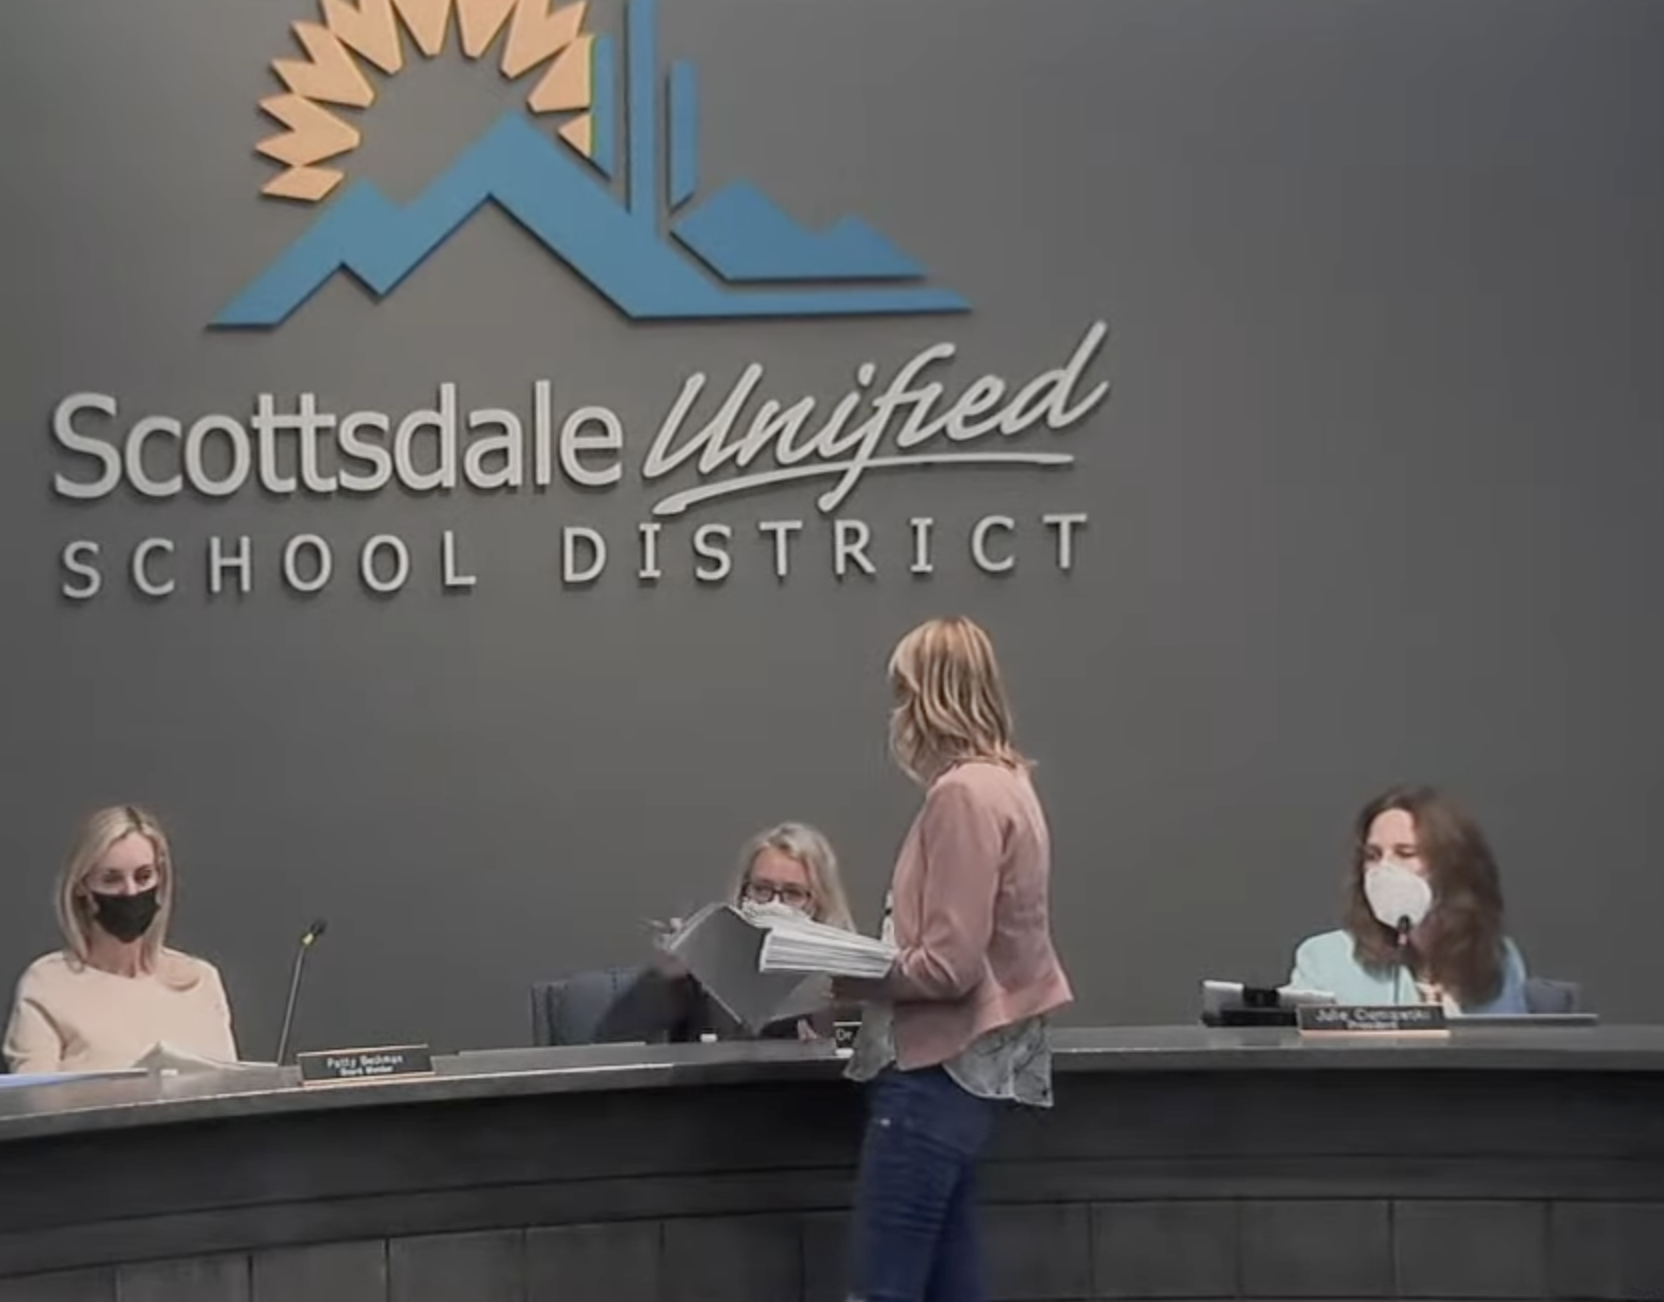 Miki Klann, from “Bonds for the Win”, serving Scottsdale Unified School District board members with documents during a meeting on Tuesday (YouTube/Scottsdale Unified School District)